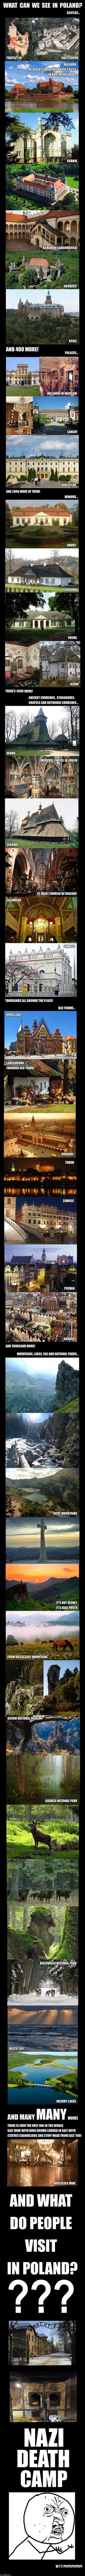 what_we_can_see_in_poland.jpg